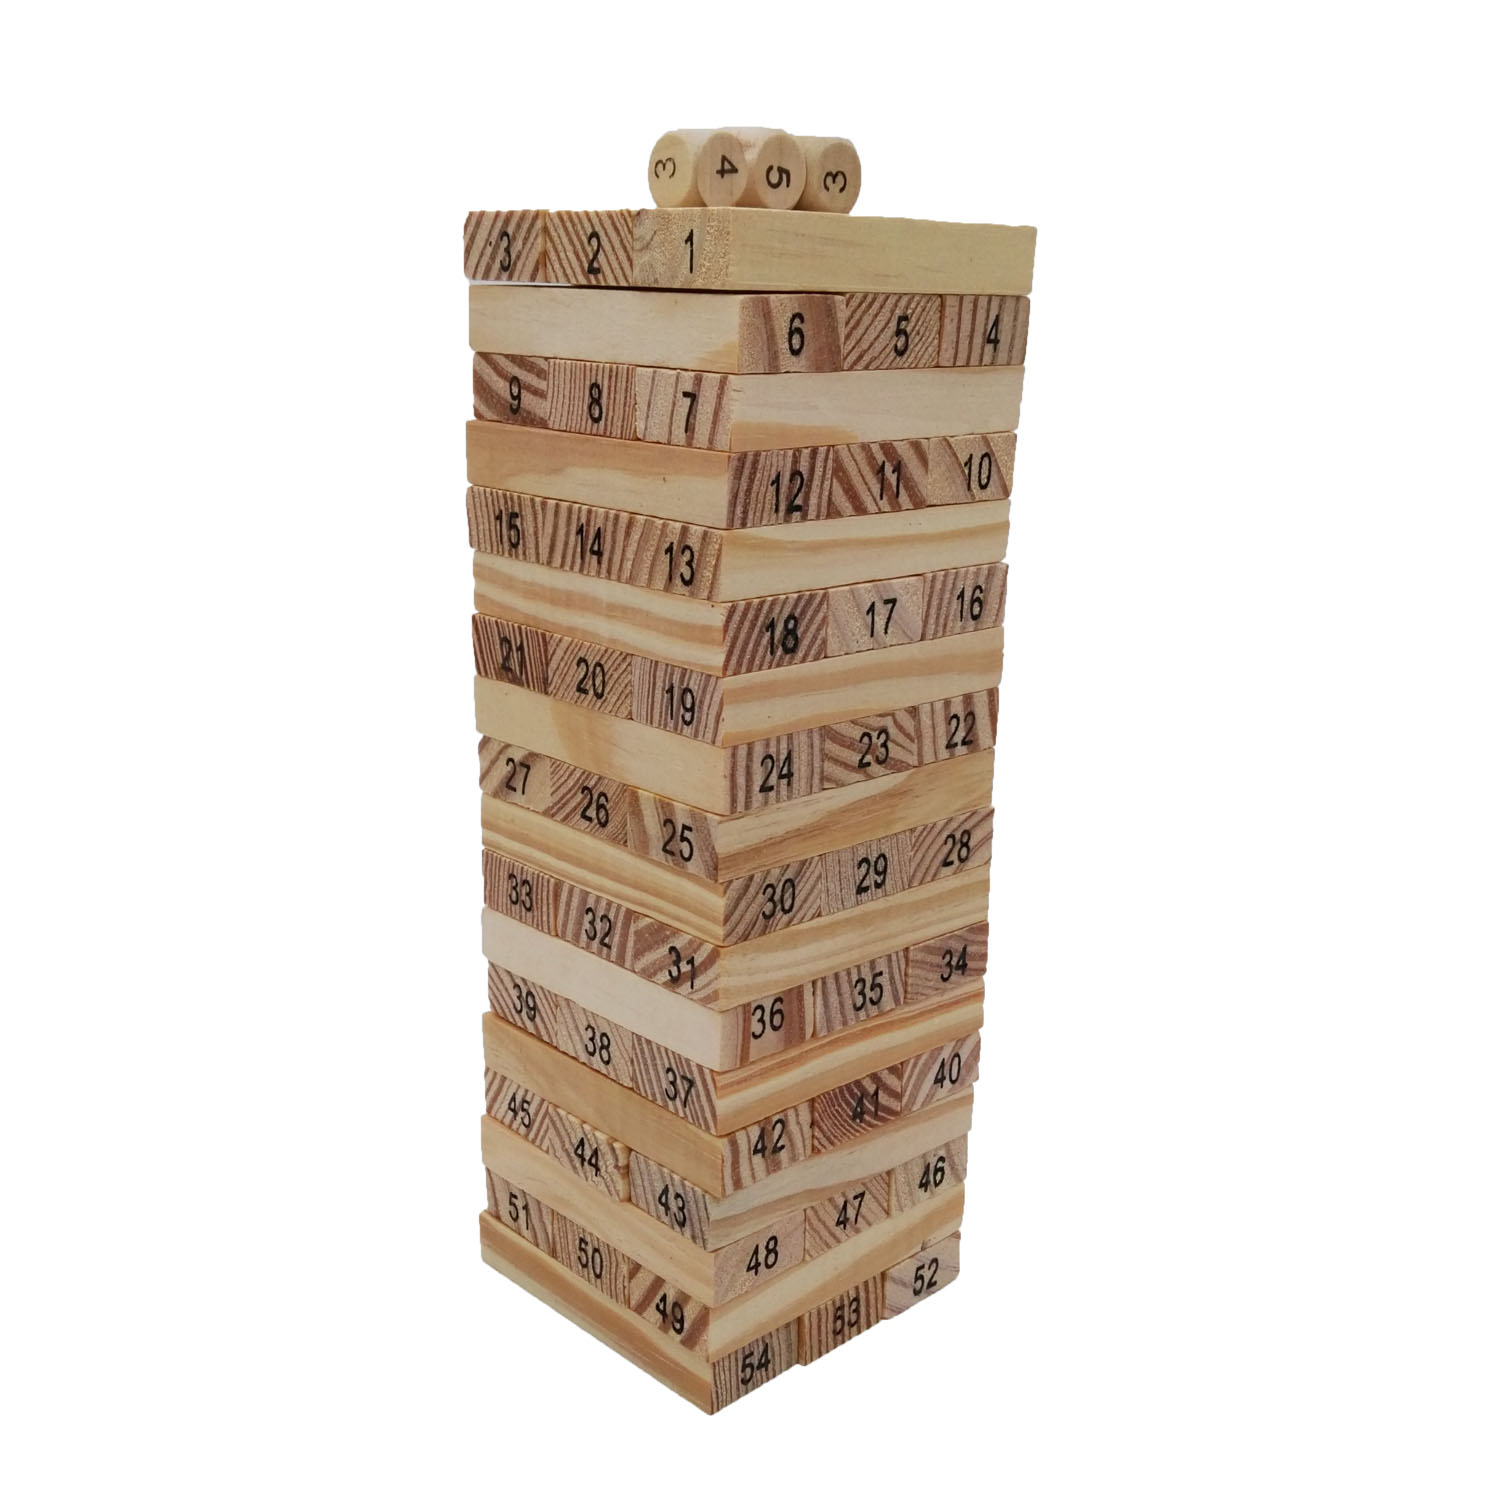 GL-AAA1849 54 PCS Wooden Stacking Block for Children Big Size